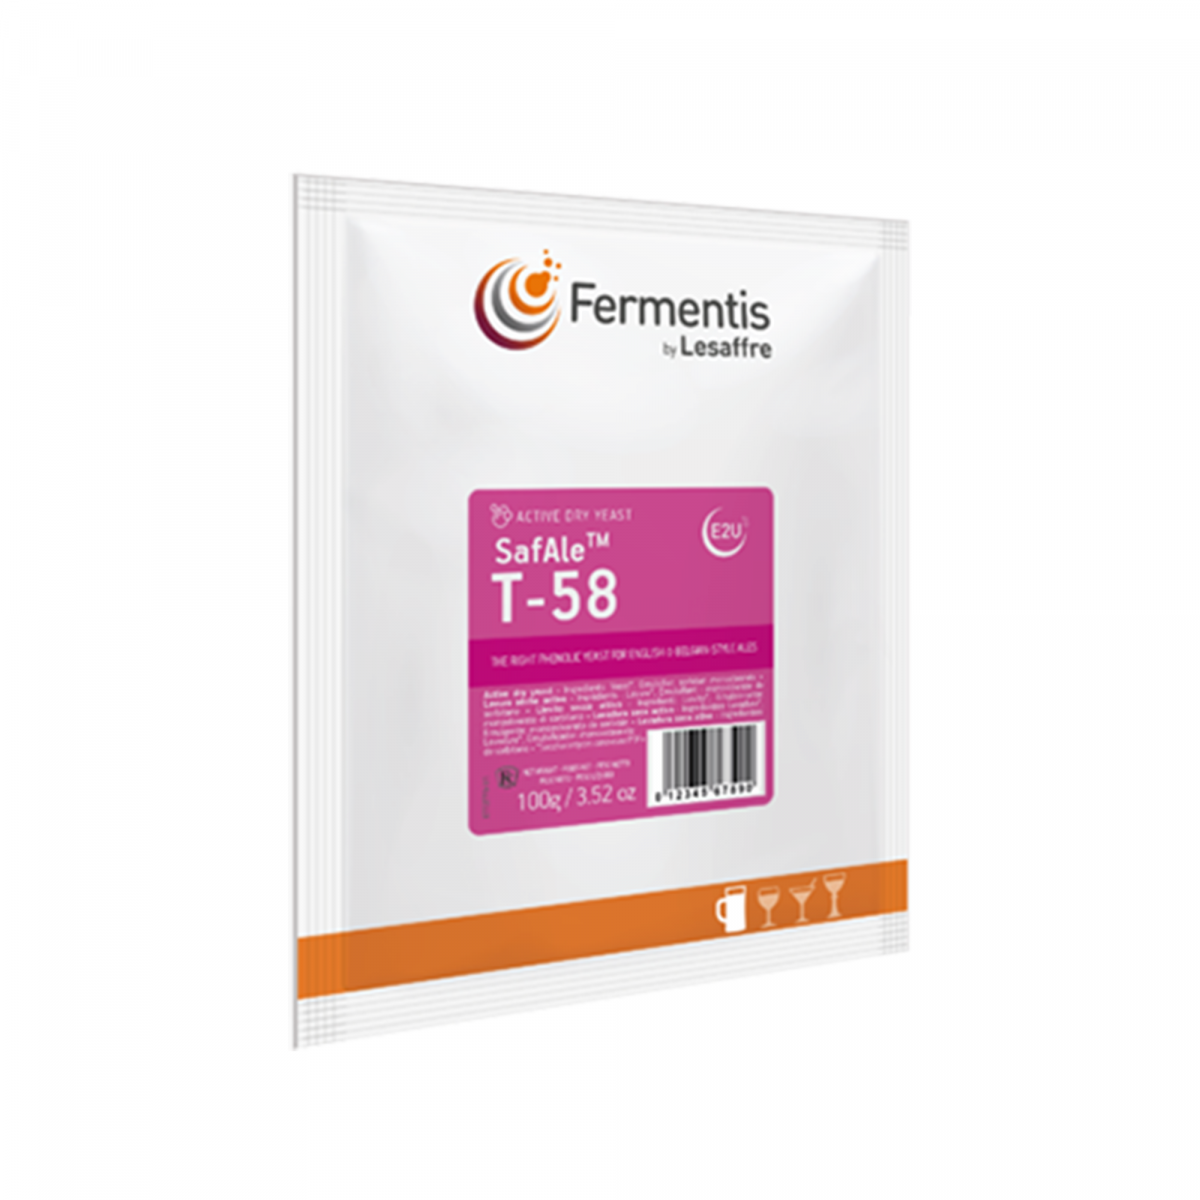 Fermentis dried brewing yeast SafAle T-58 100 g